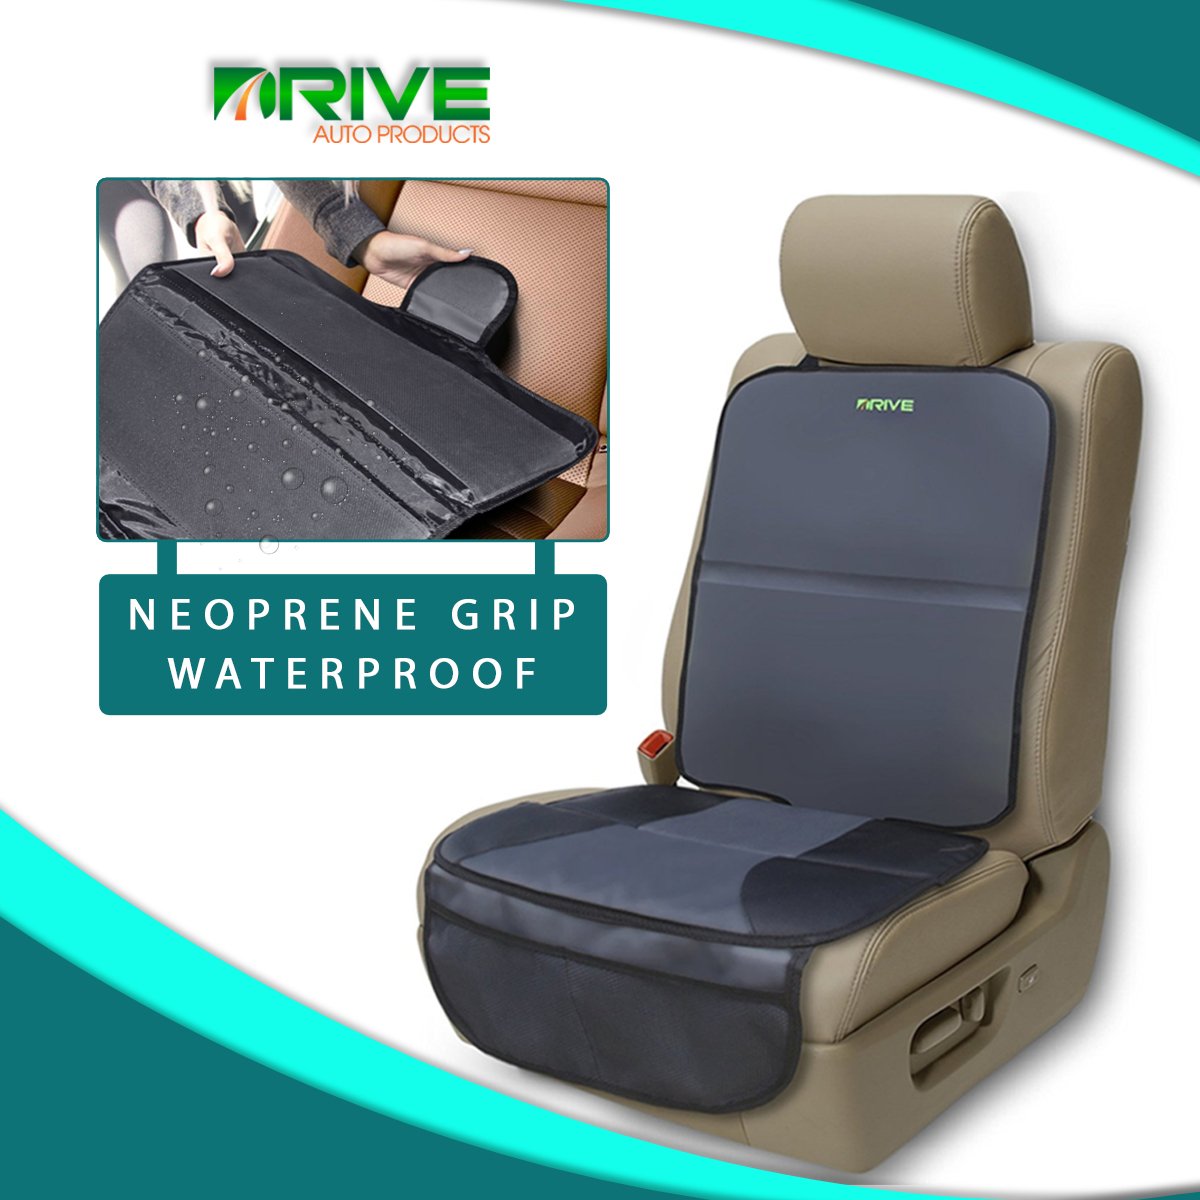 Car Seat Protector by Drive Auto Products - Best Protection for Child